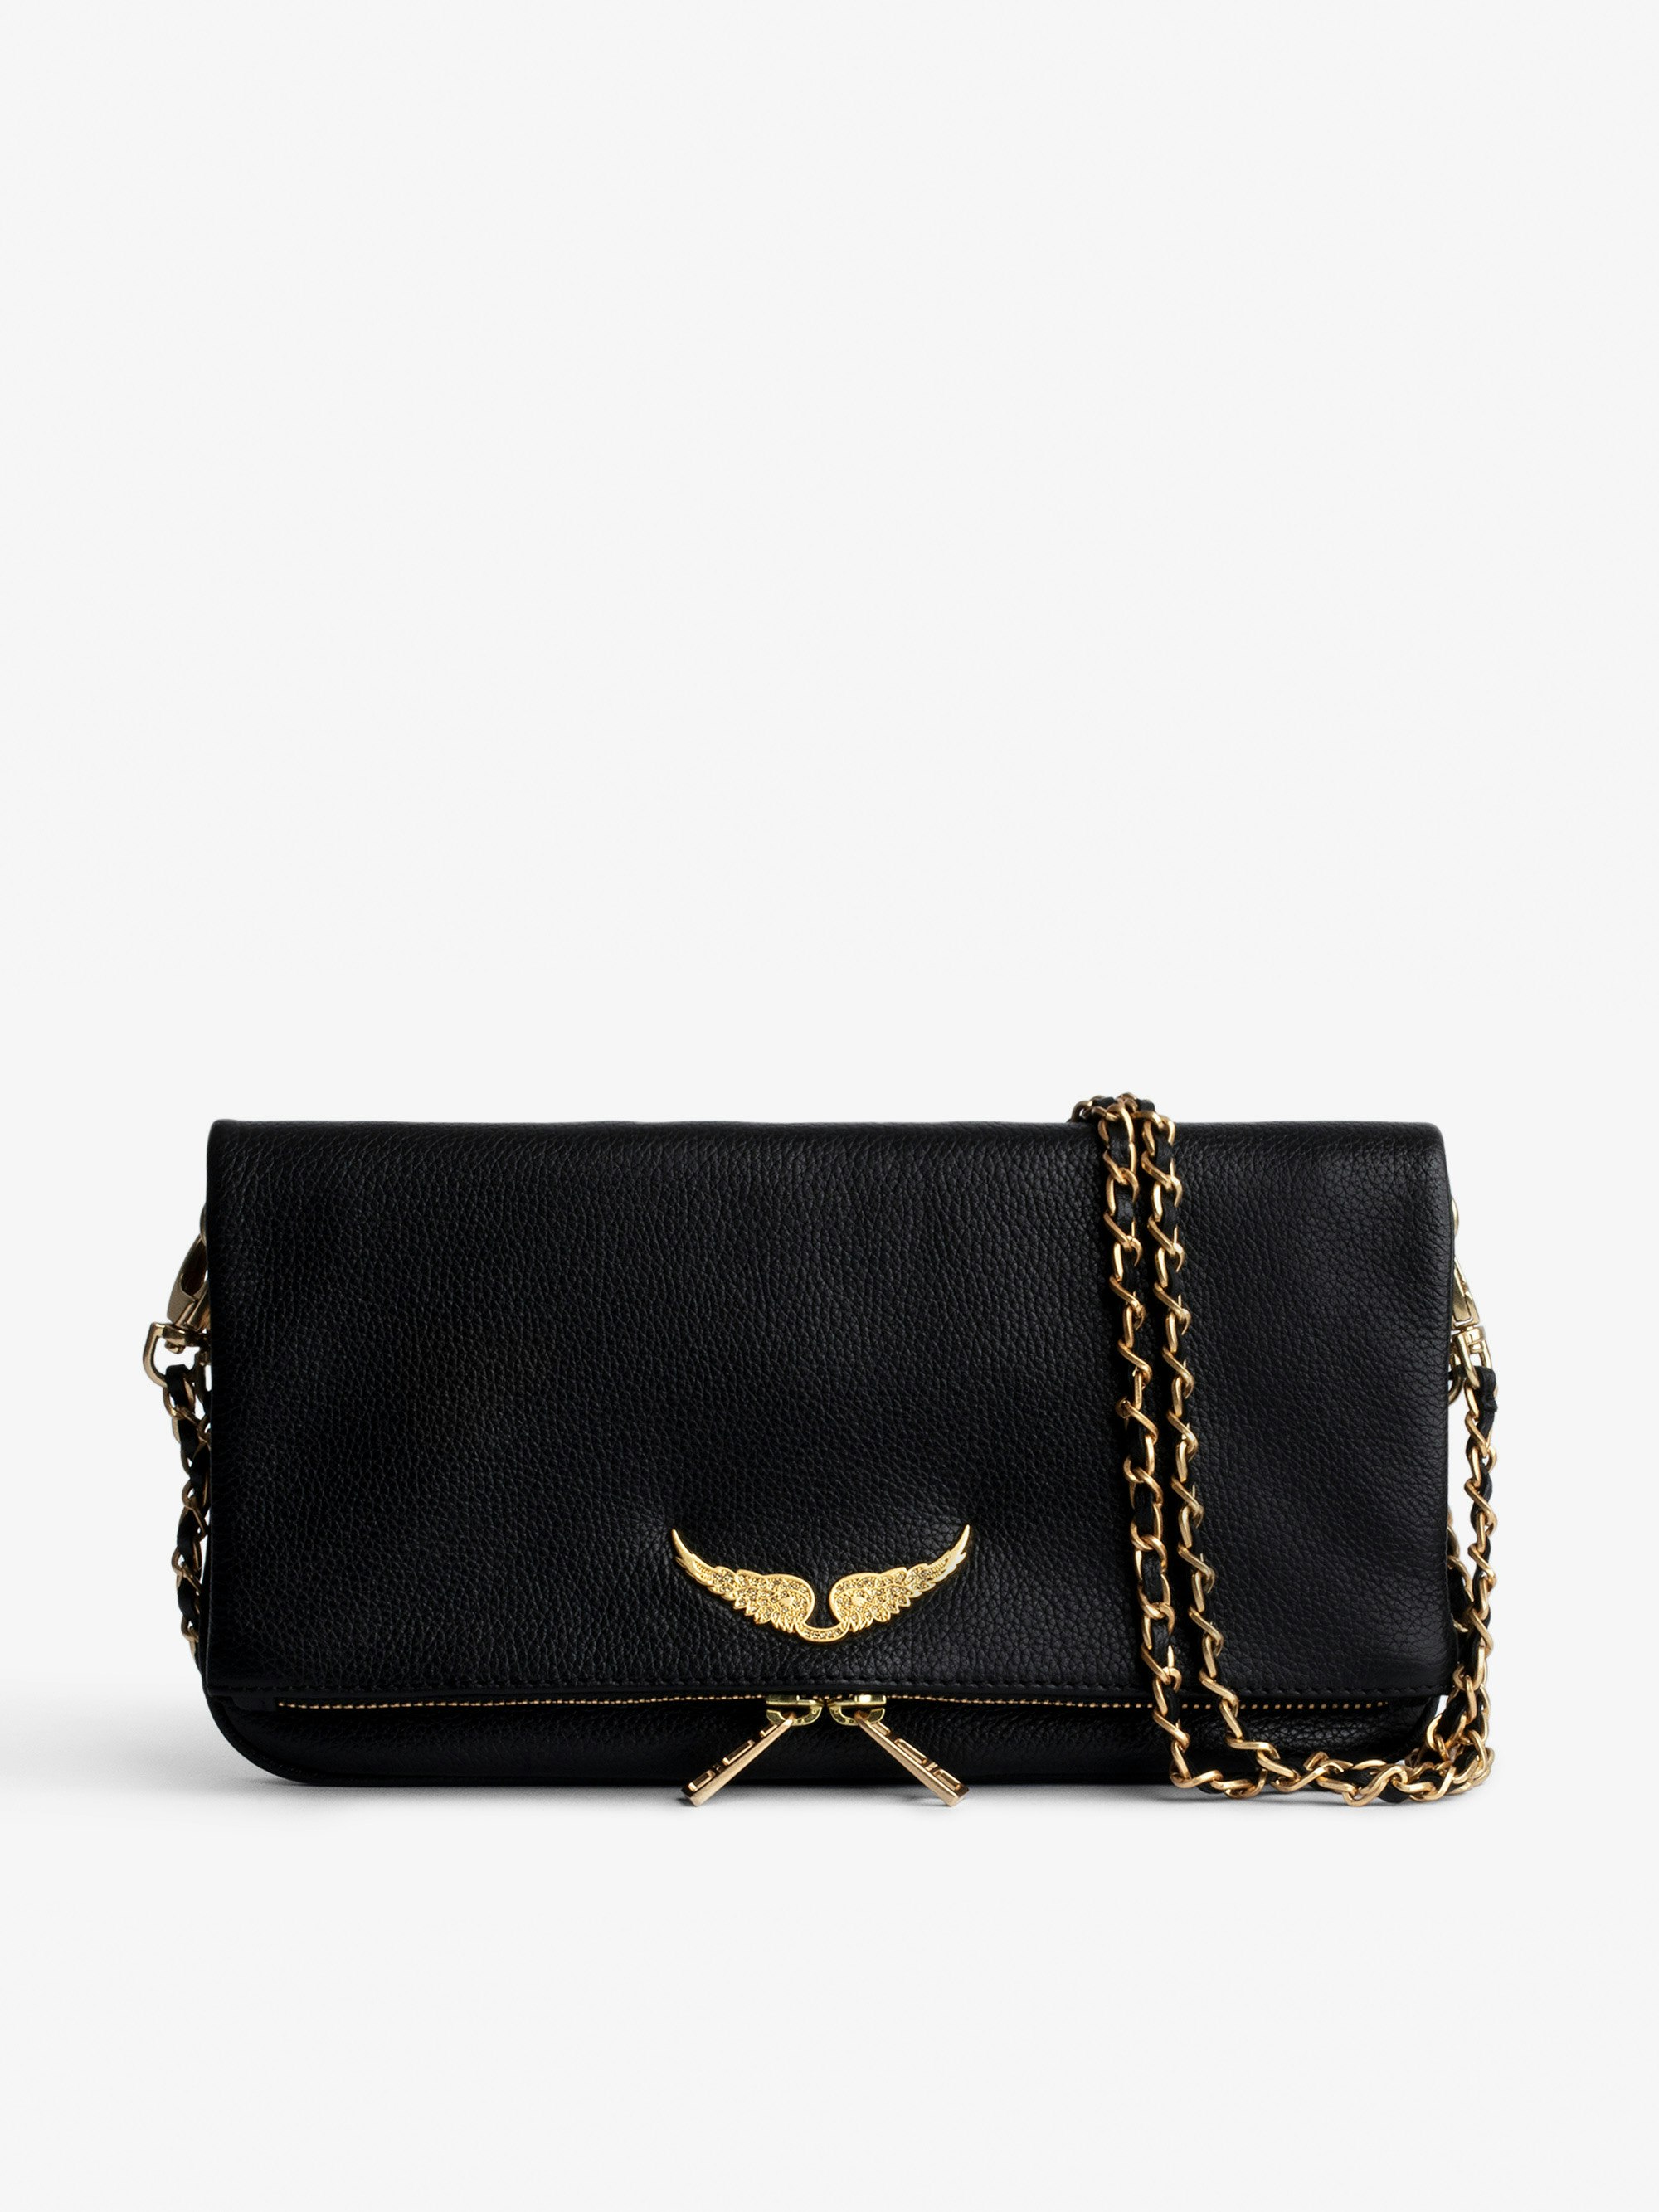 Rock Clutch - Women’s black leather clutch with gold-toned detailing.